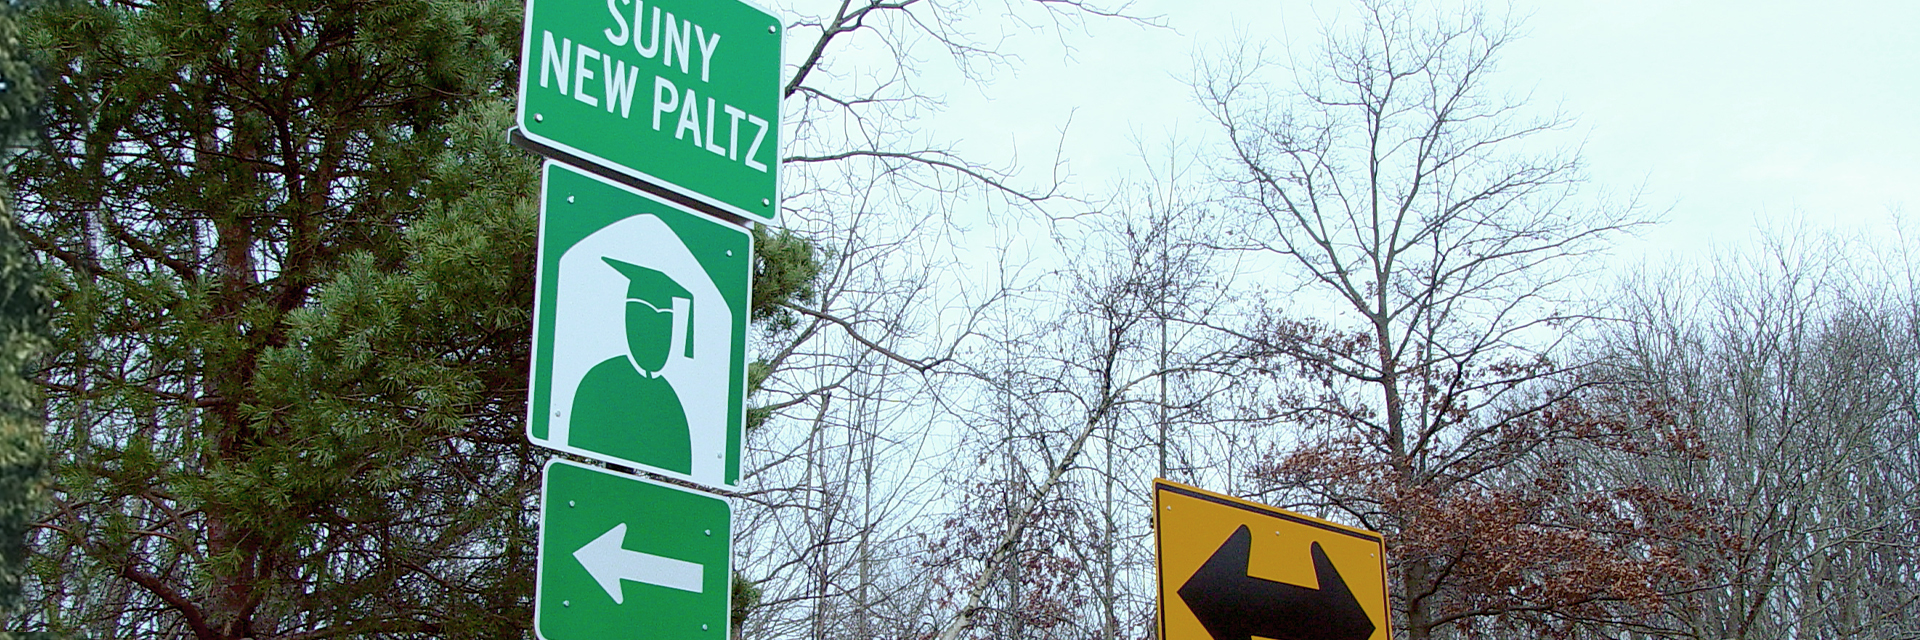 Road sign point to SUNY New Paltz